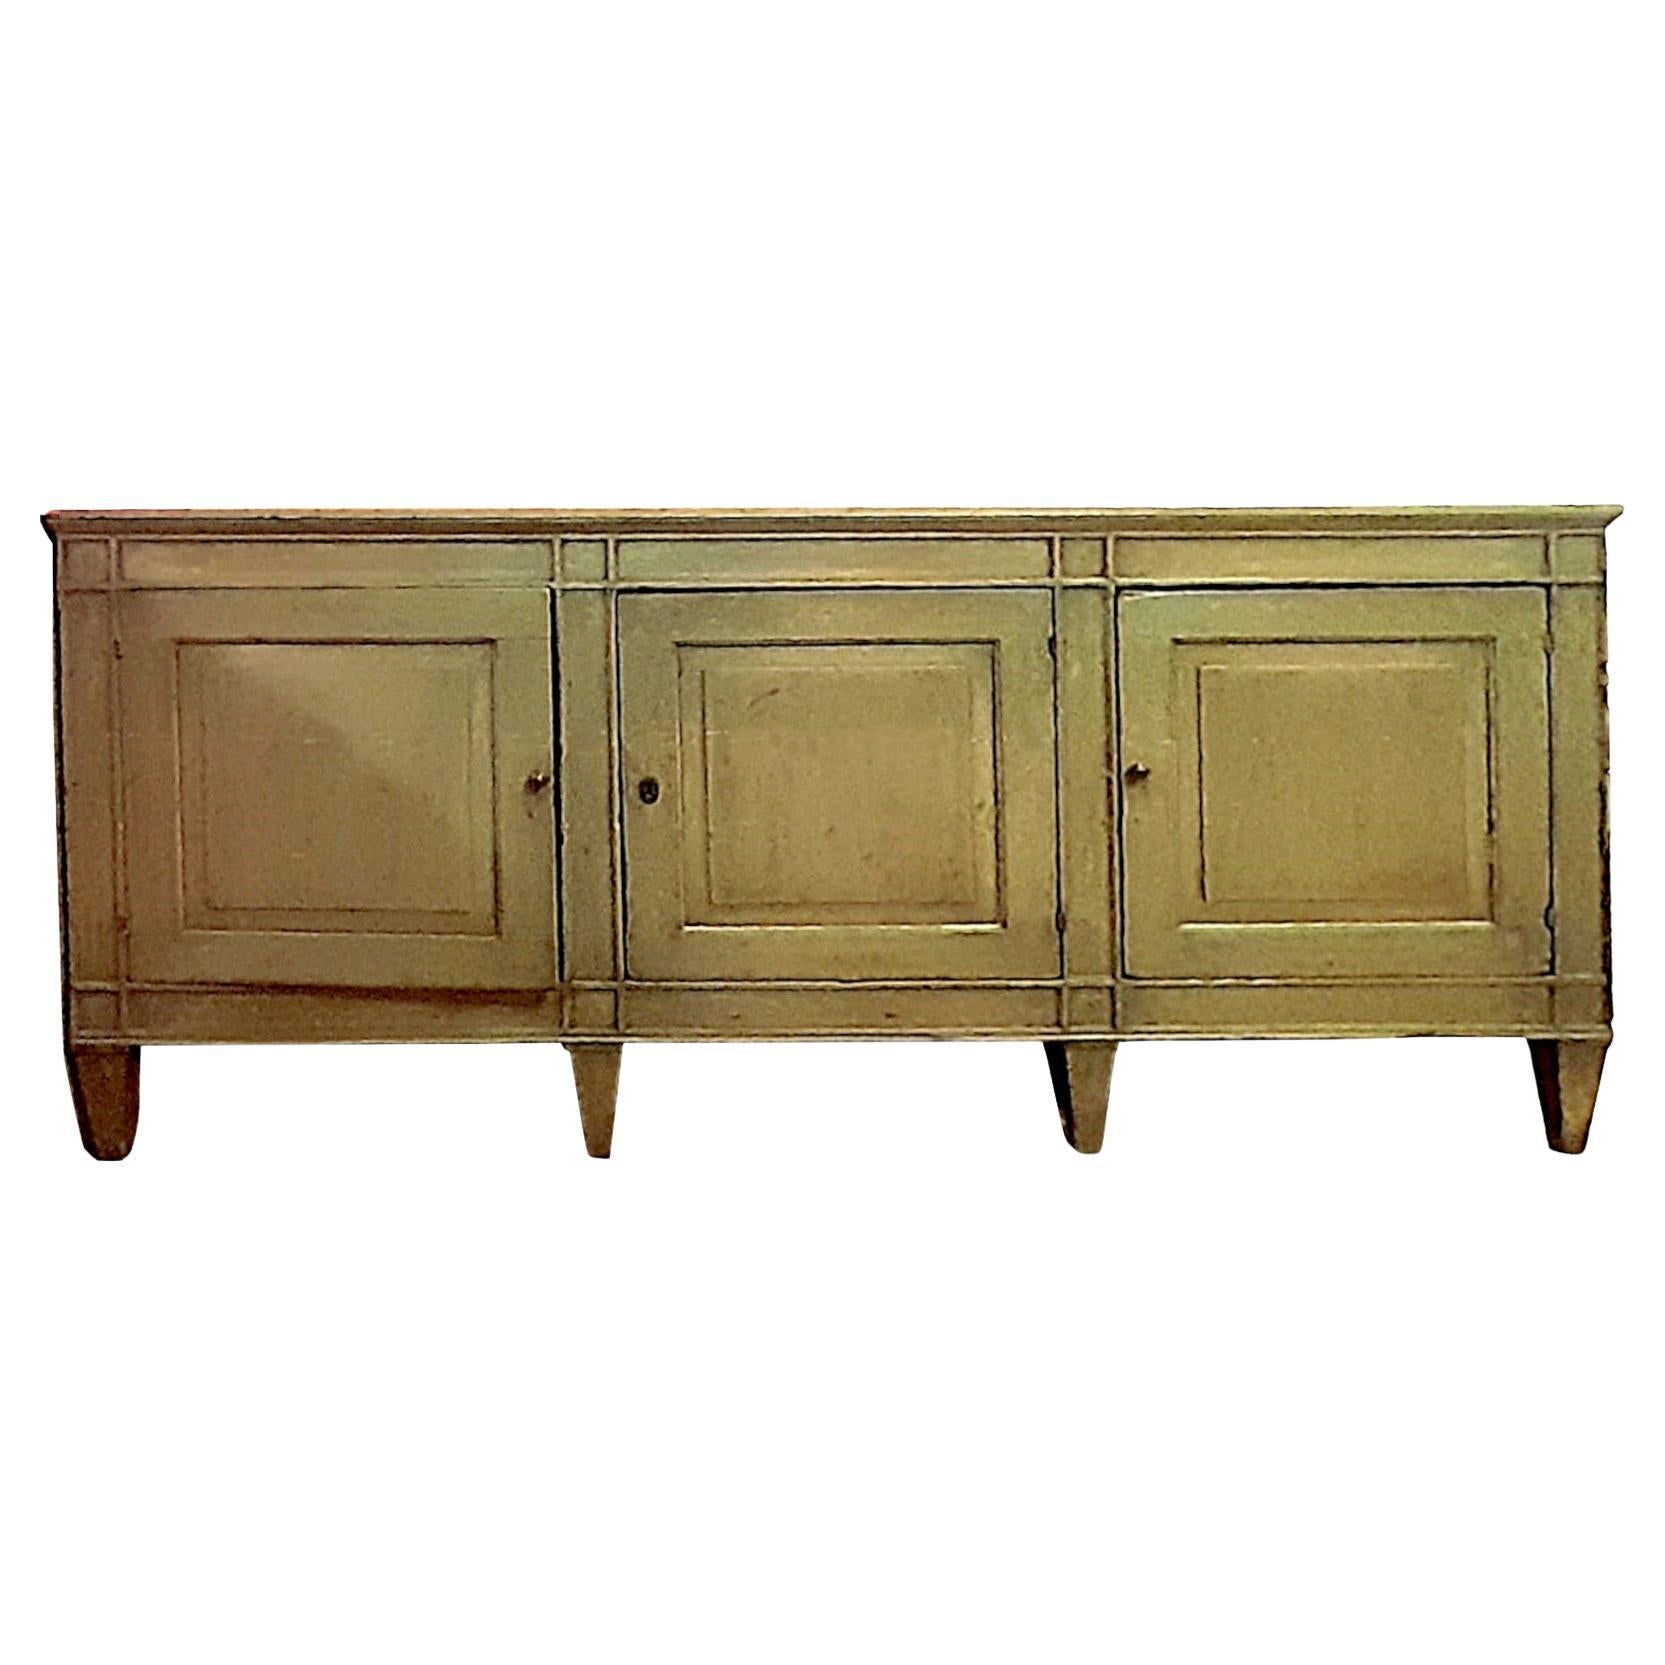 Venetian Louis XVI sideboard from the late 1700s with three doors lacquered in tempera